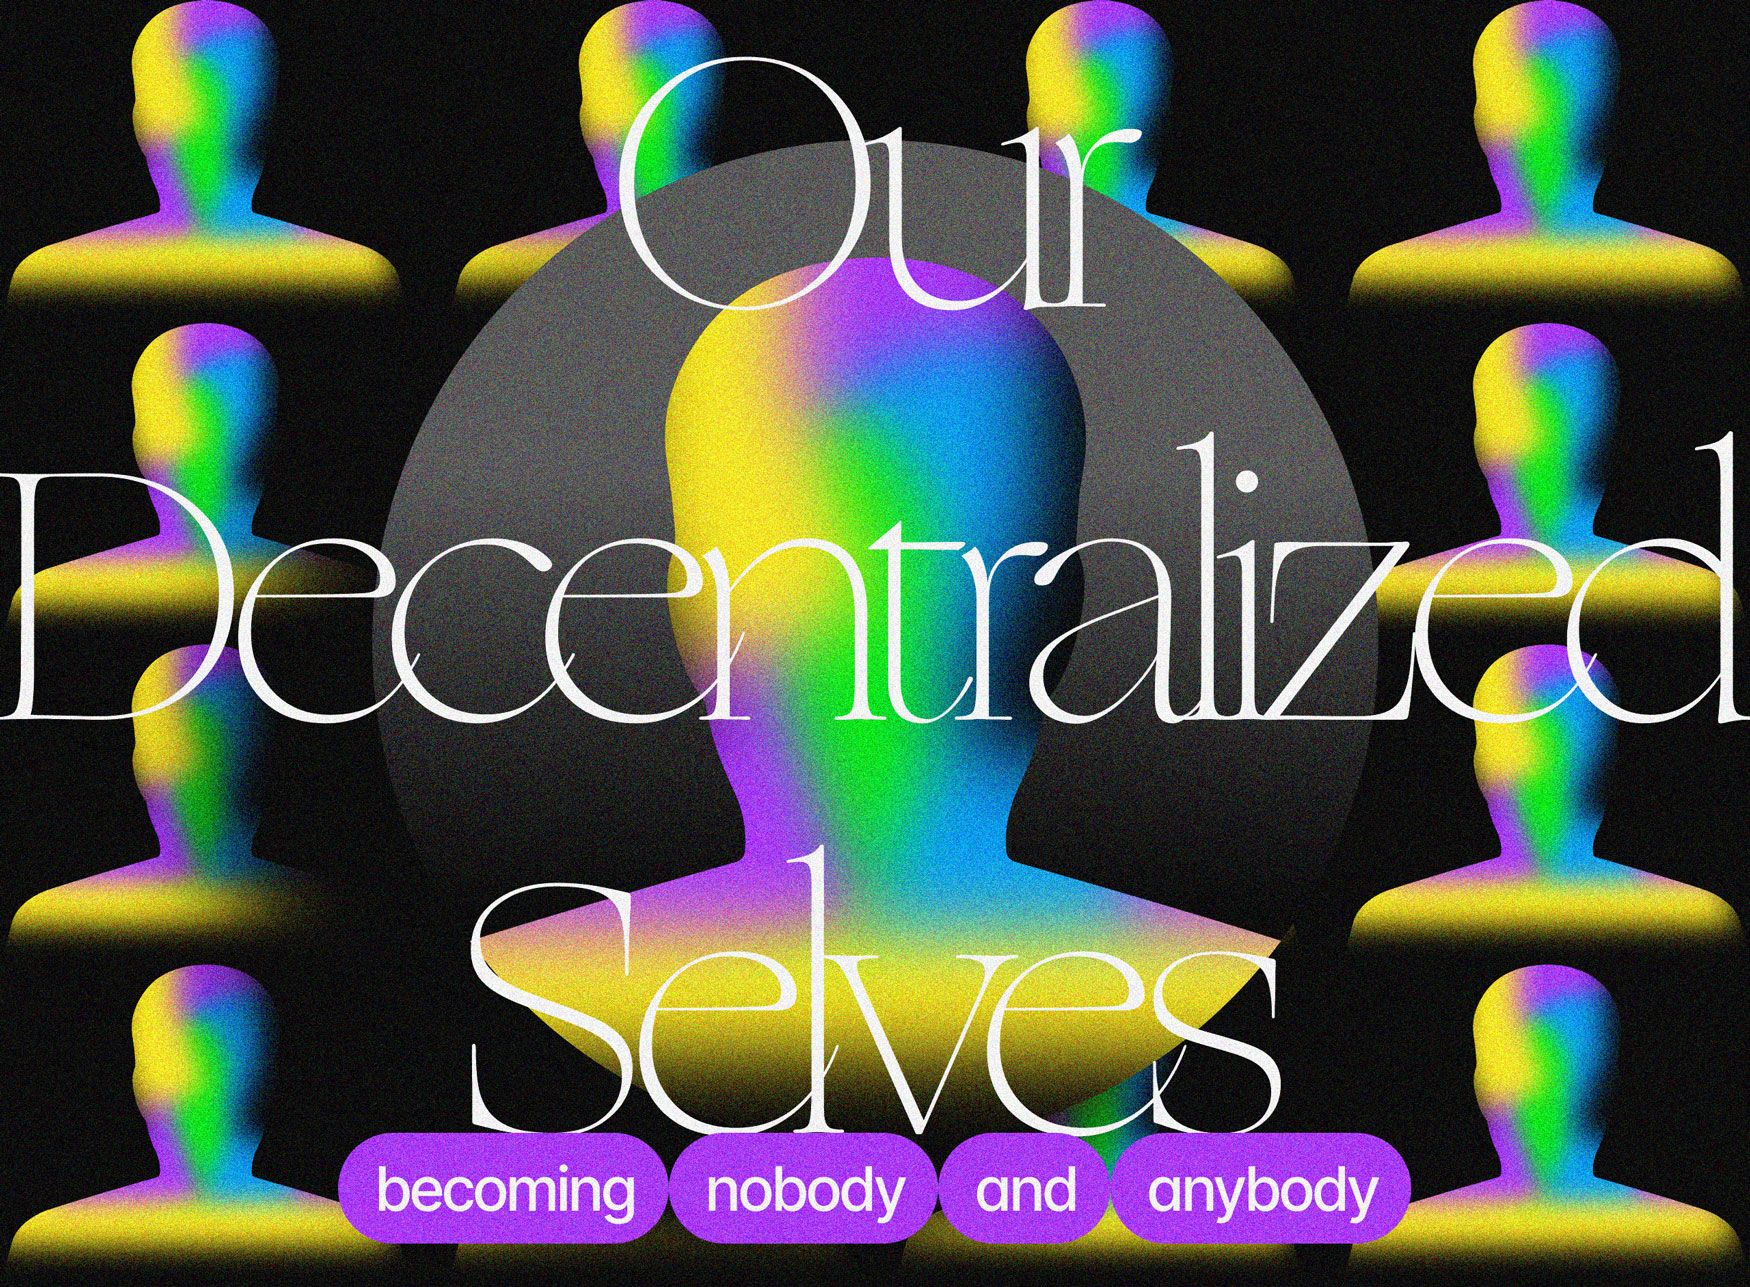 Our Decentralized Selves: Creating in a Post-Identity Future